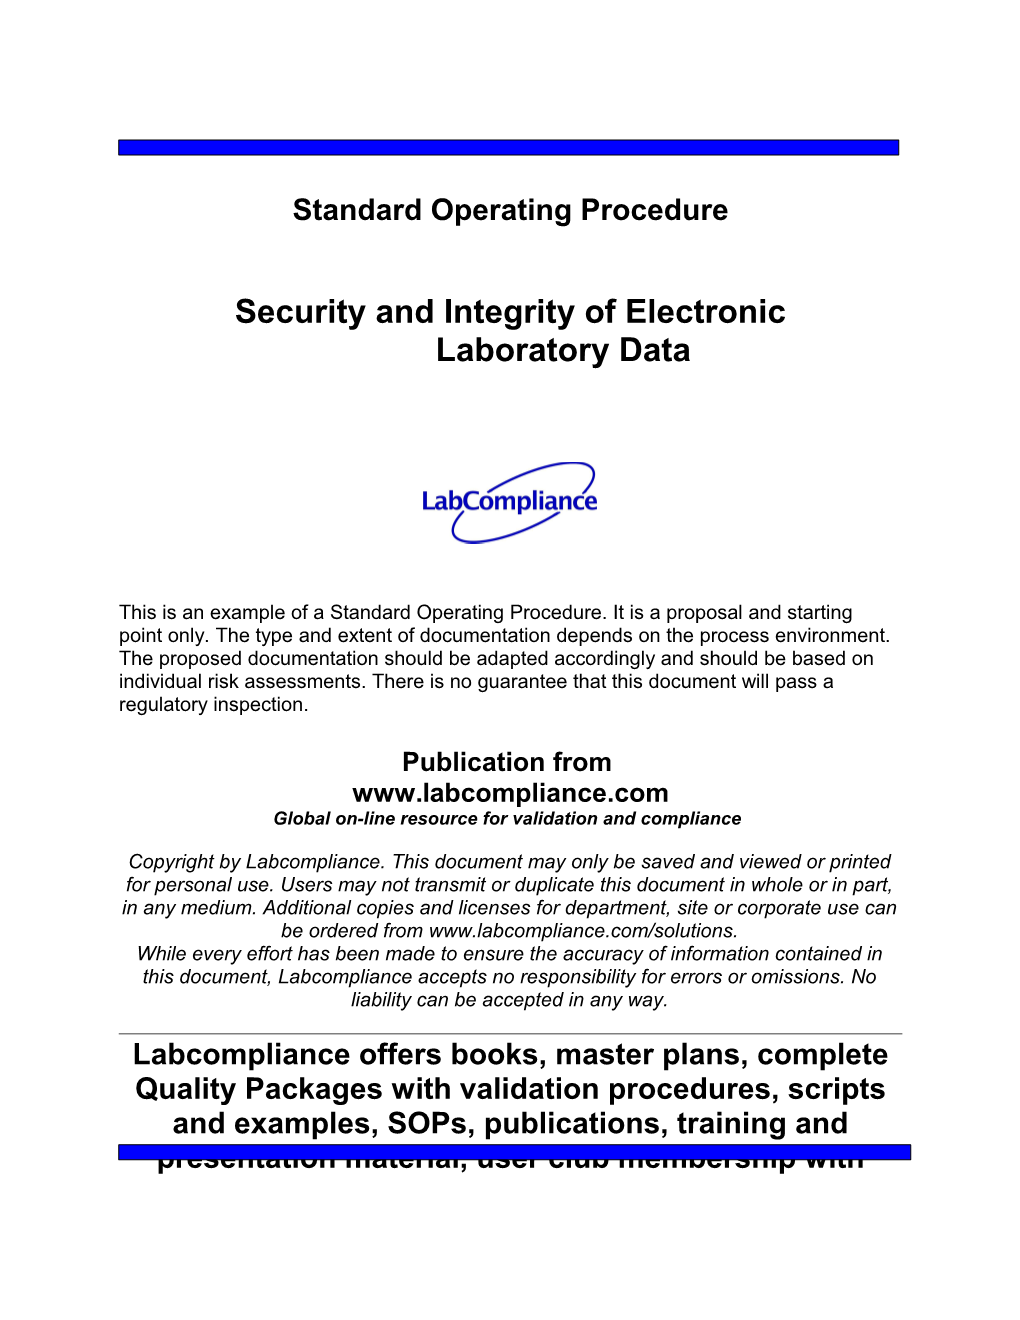 Security and Integrity of Electronic Laboratory Data